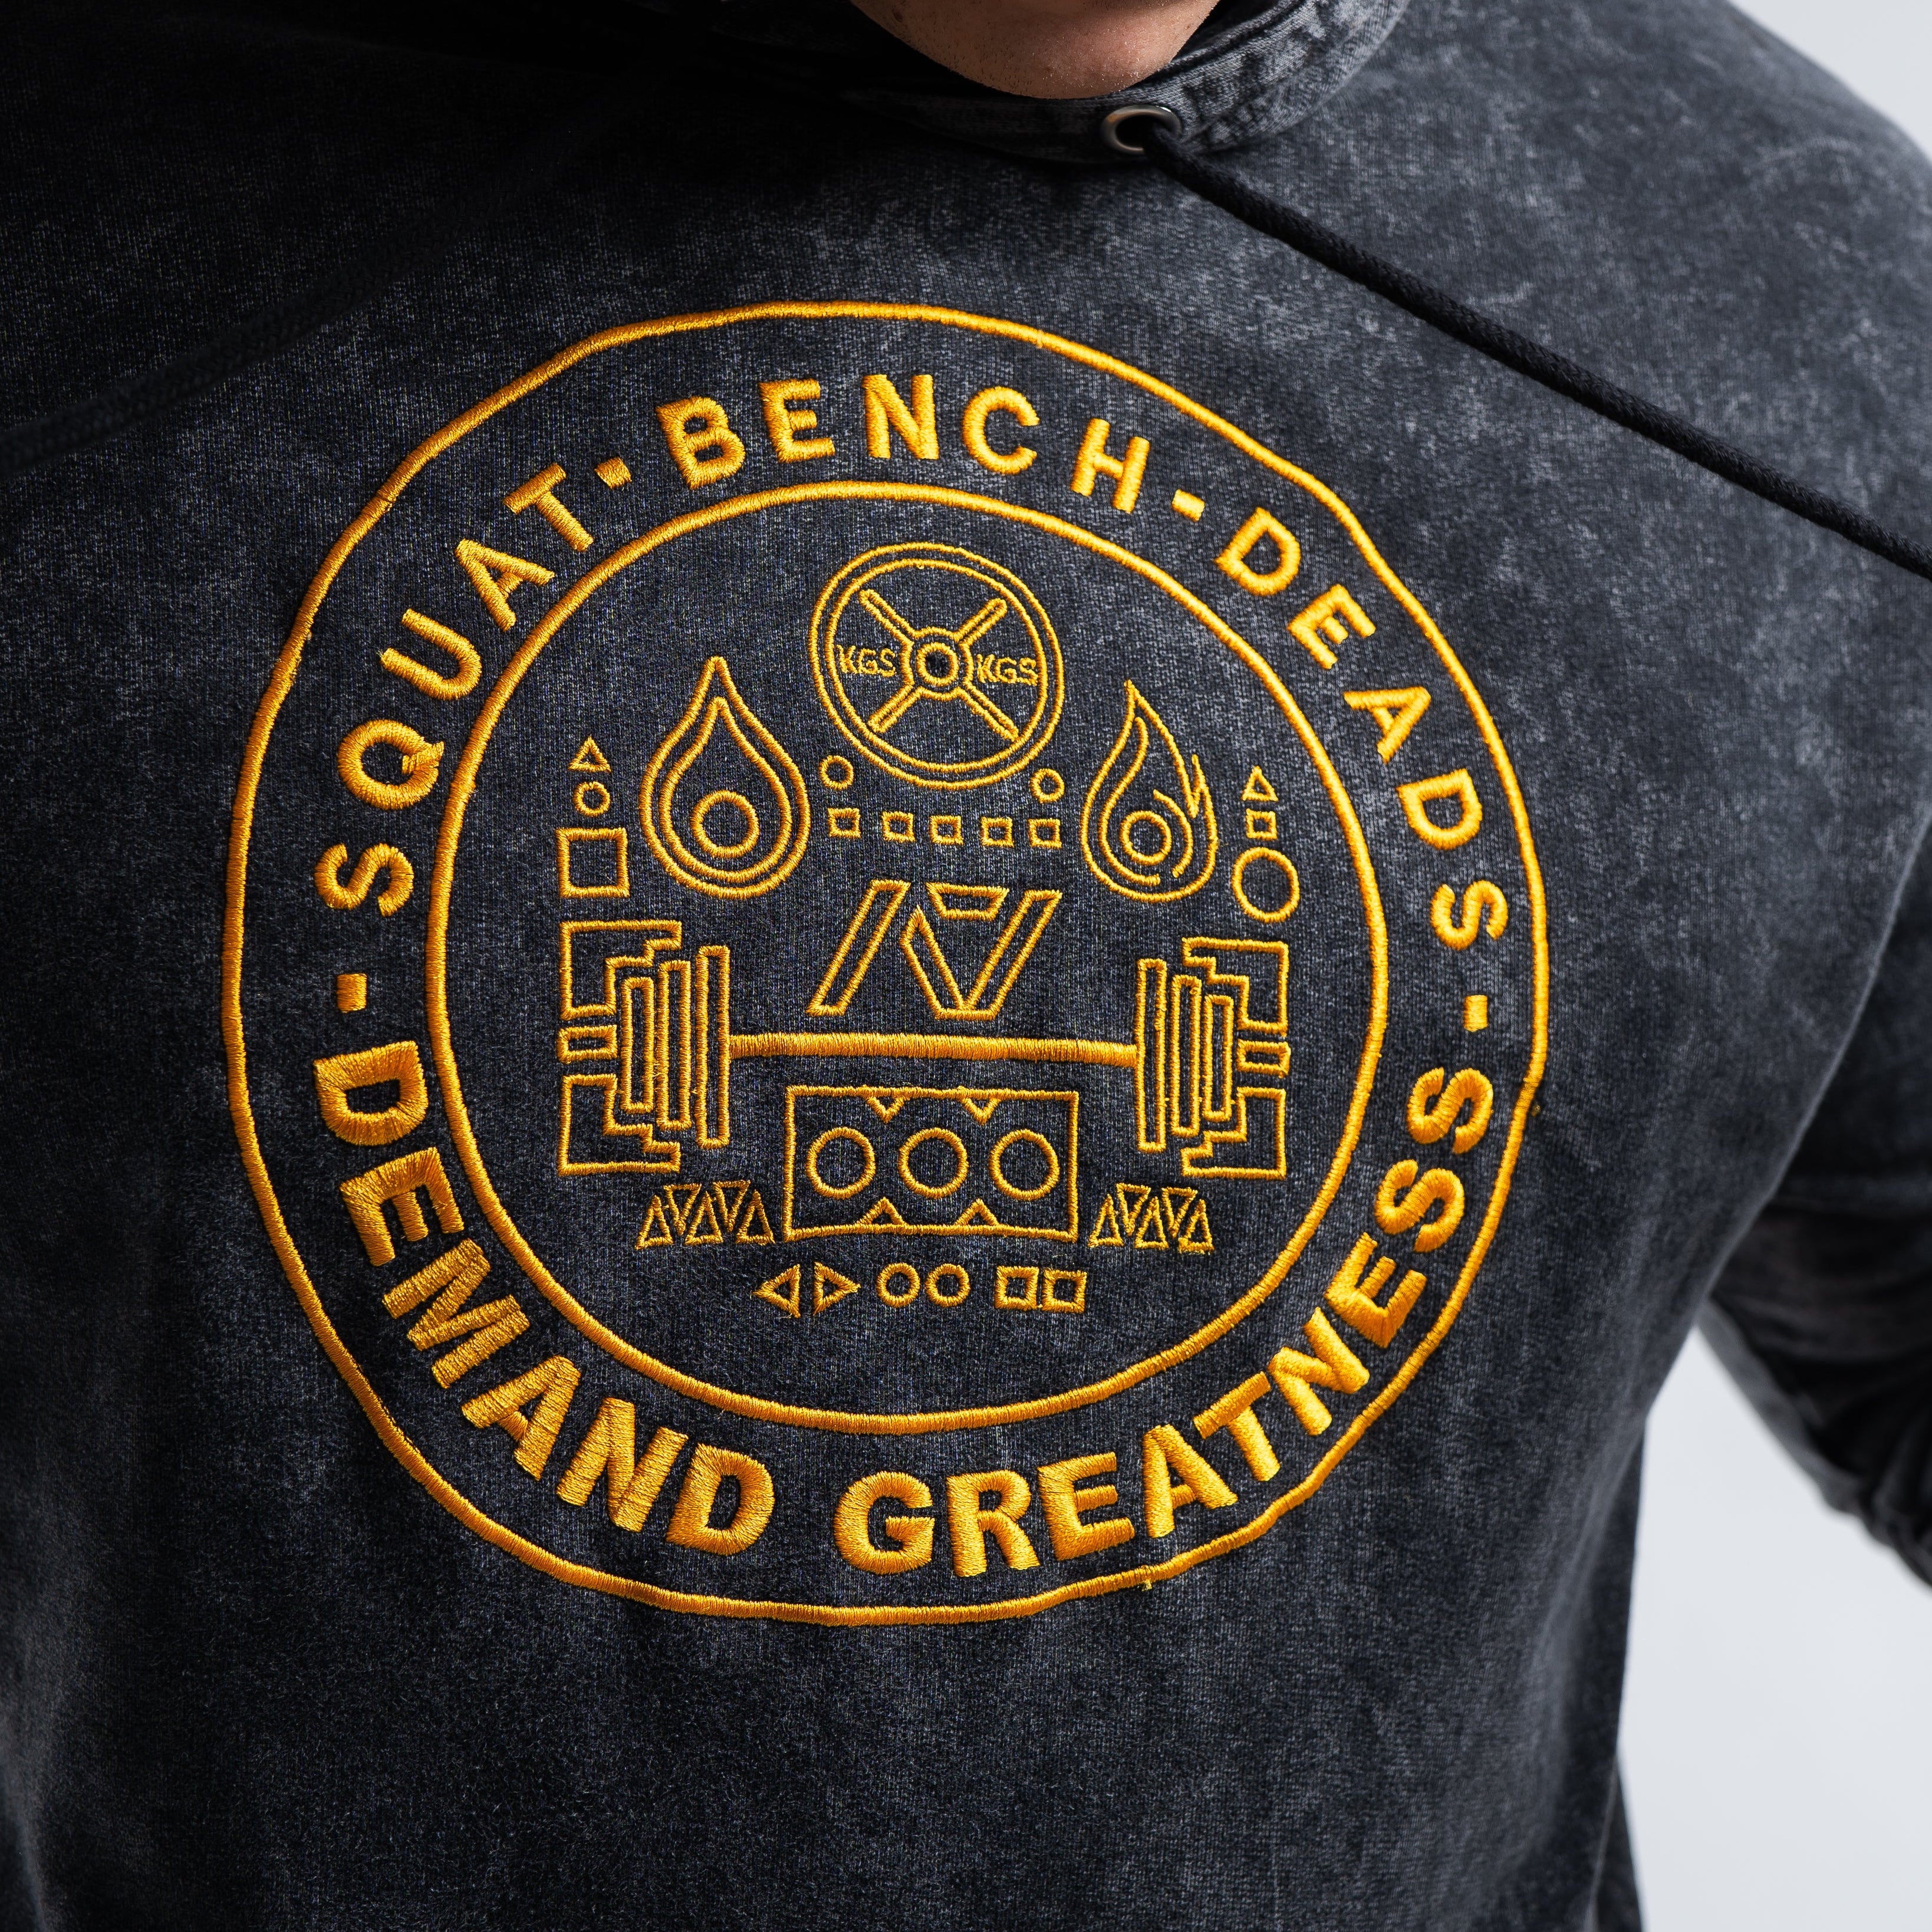 A single thread serves as the foundation of this collection. Thread, thoughtfully woven together to create a stronger bond, manifesting the showcase of its strength. Each strand connects the mindset of the athlete through their actions. Building a stronger foundation and the development of their Gold Medal Mentality. All A7 Powerlifting Equipment shipping to UK, Norway, Switzerland and Iceland.